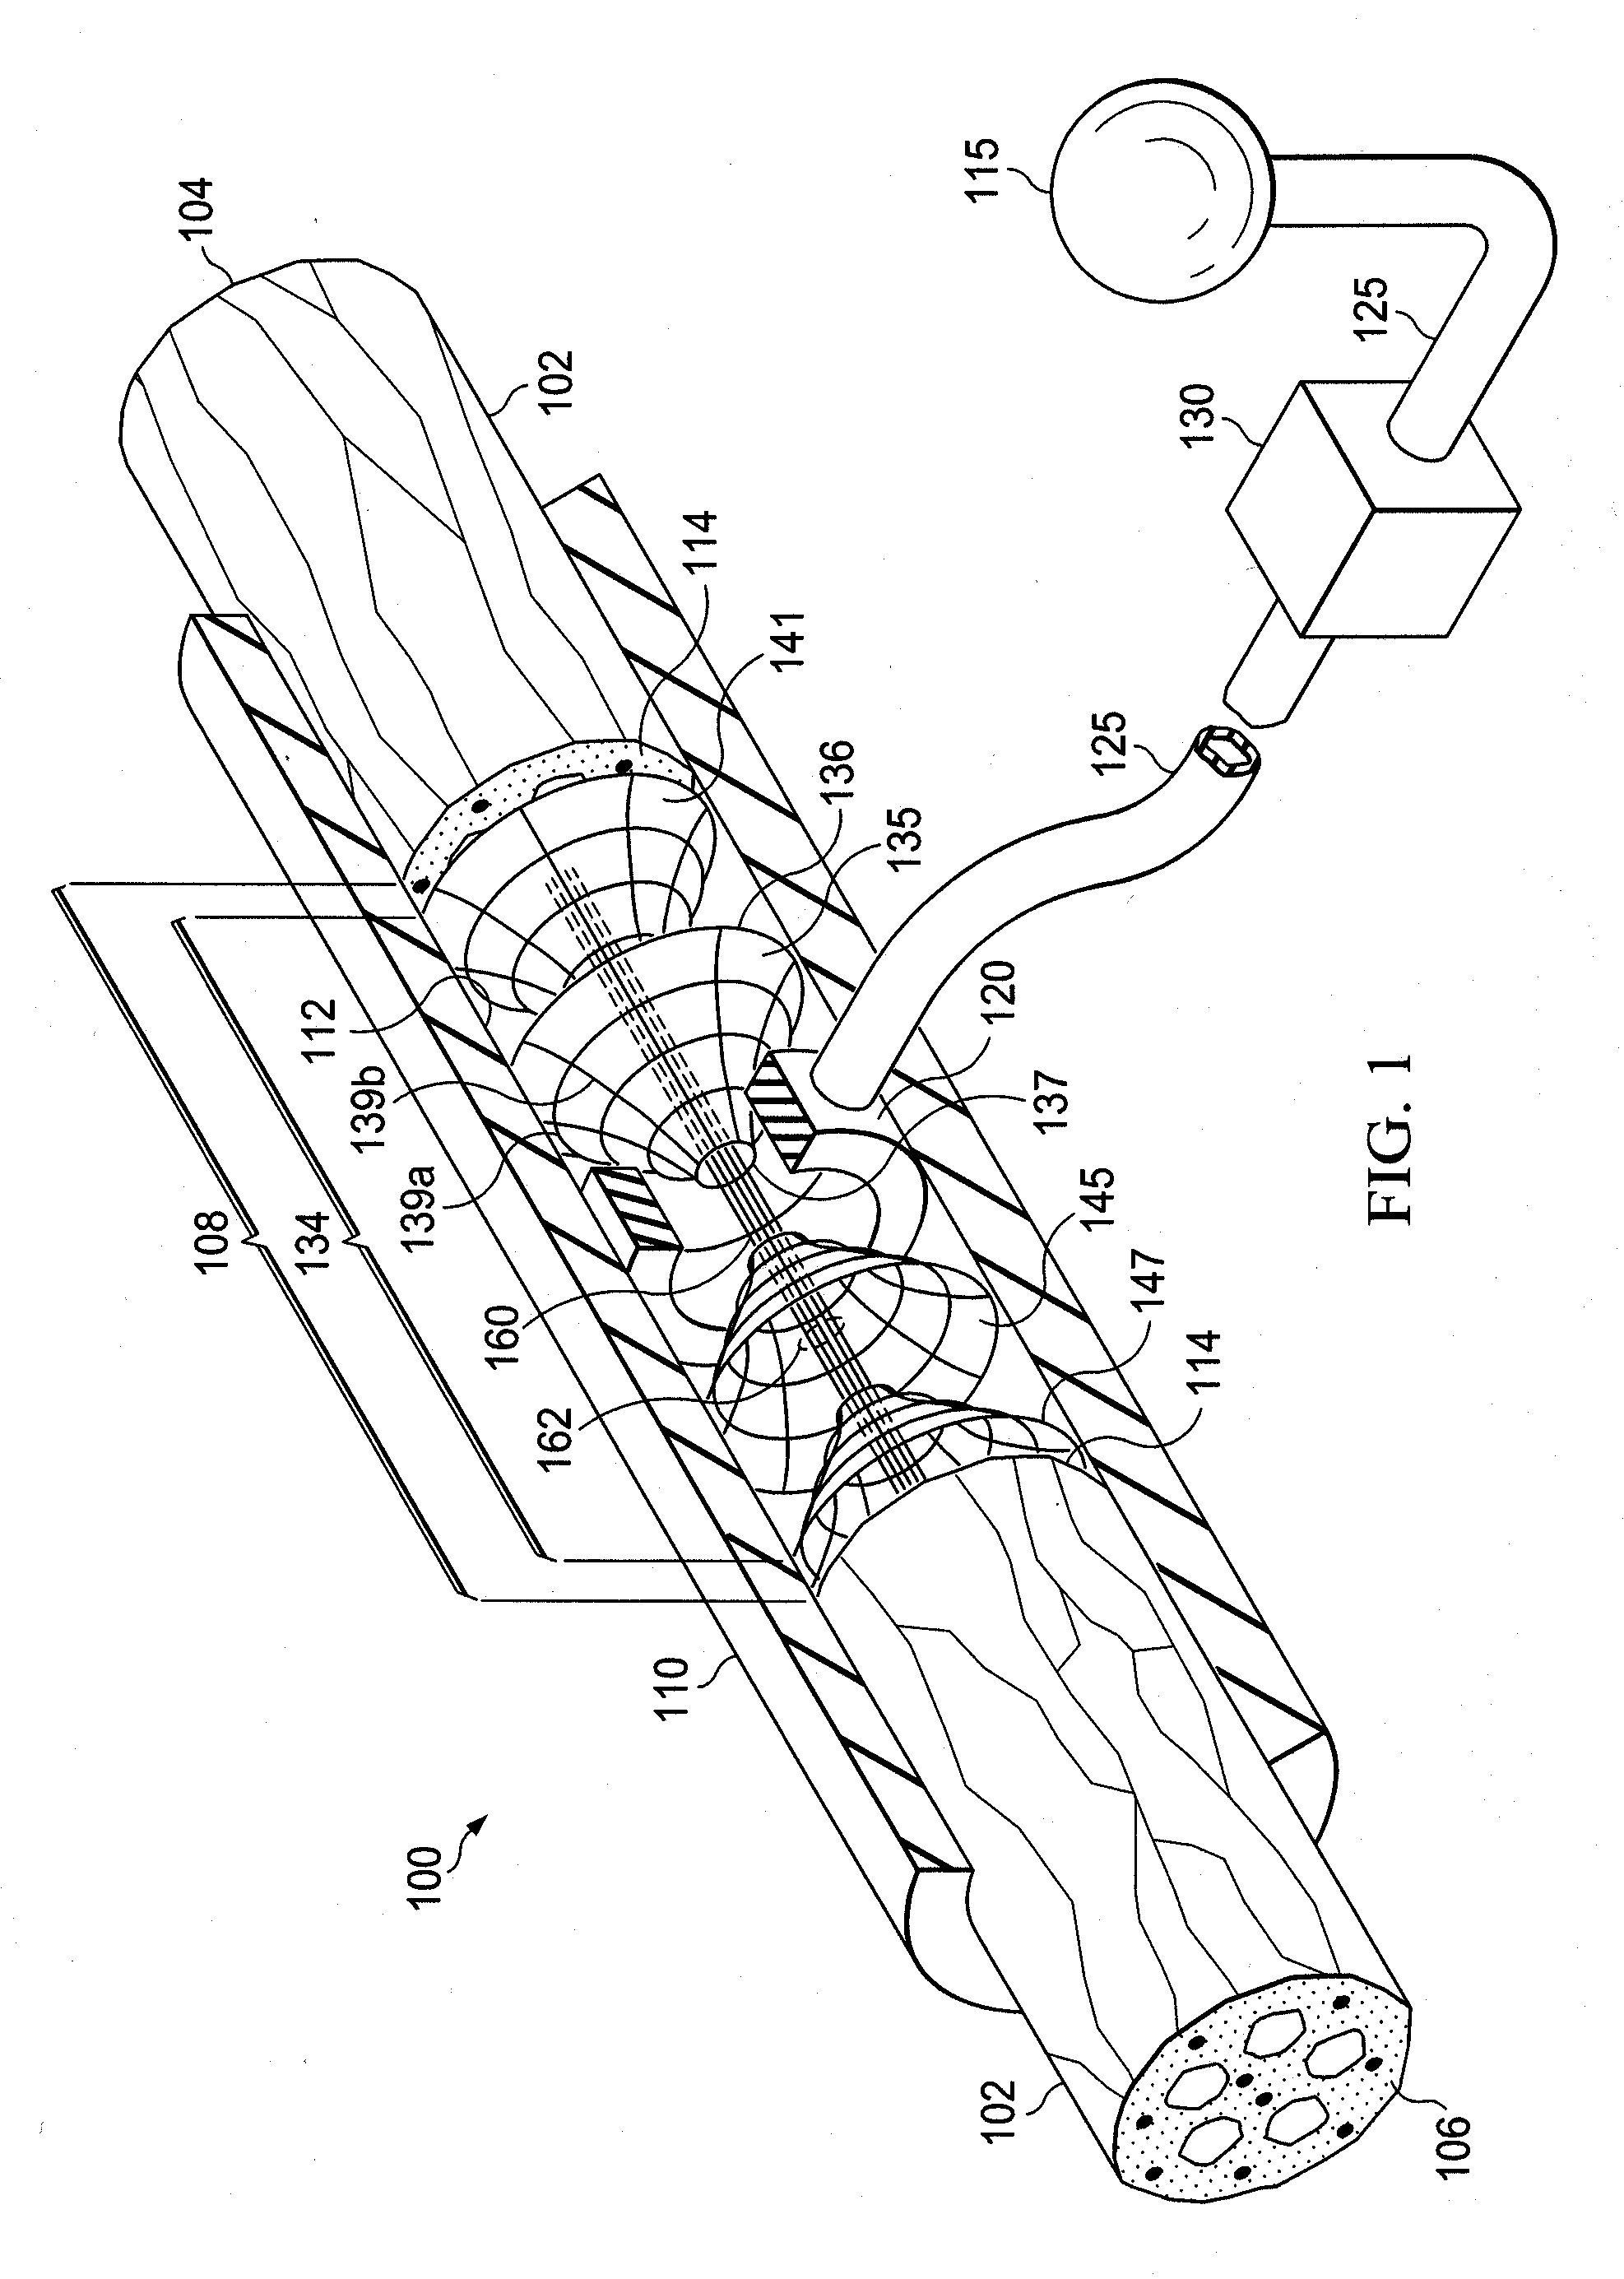 System for providing fluid flow to nerve tissues